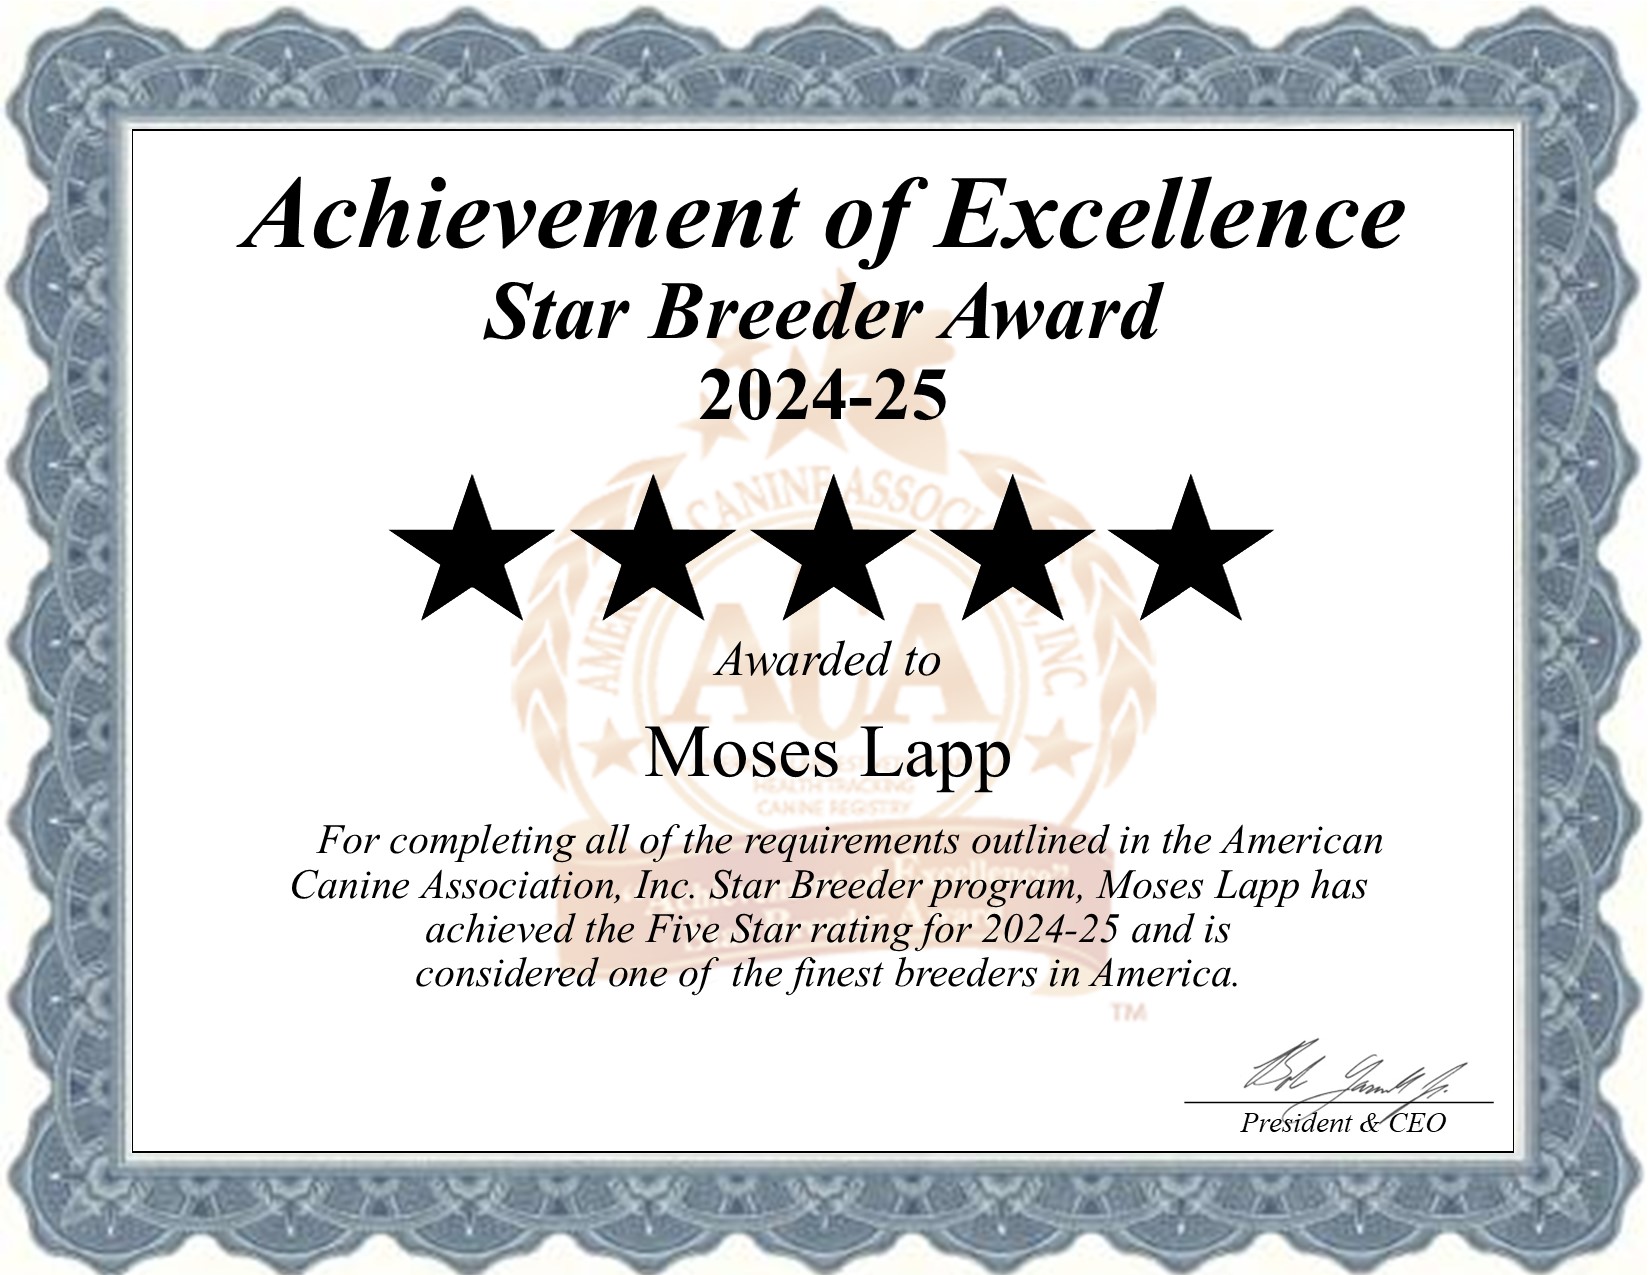 Moses, Lapp, dog, breeder, star, certificate, Moses-Lapp, Myerstown, PA, Pennsylvania, puppy, dog, kennels, mill, puppymill, usda, 5-star, aca, ica, registered, poode, bichon, maltese, none